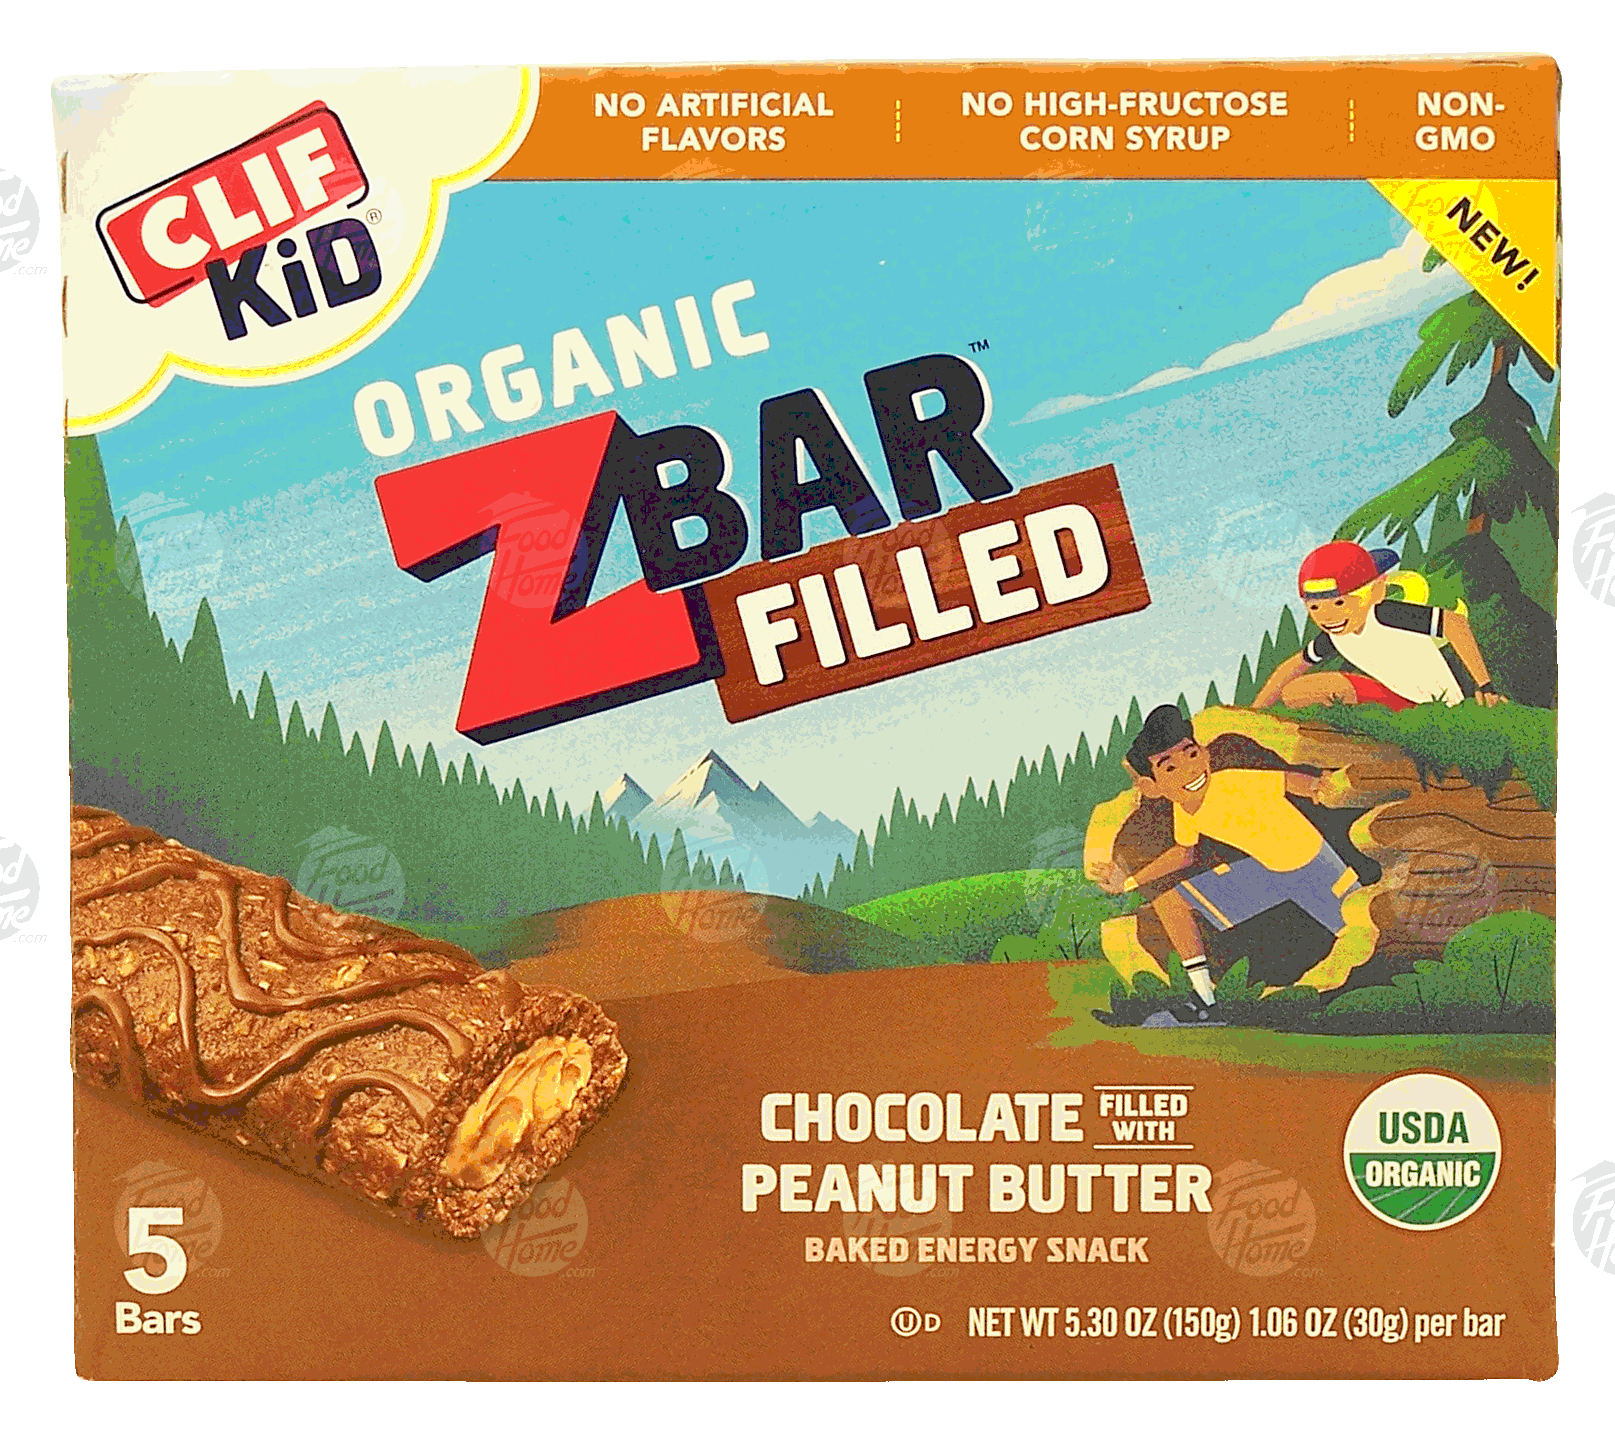 Clif Bar(R) Kid organic Z Bar; chocolate filled with peanut butter baked energy snack, 5-bars Full-Size Picture